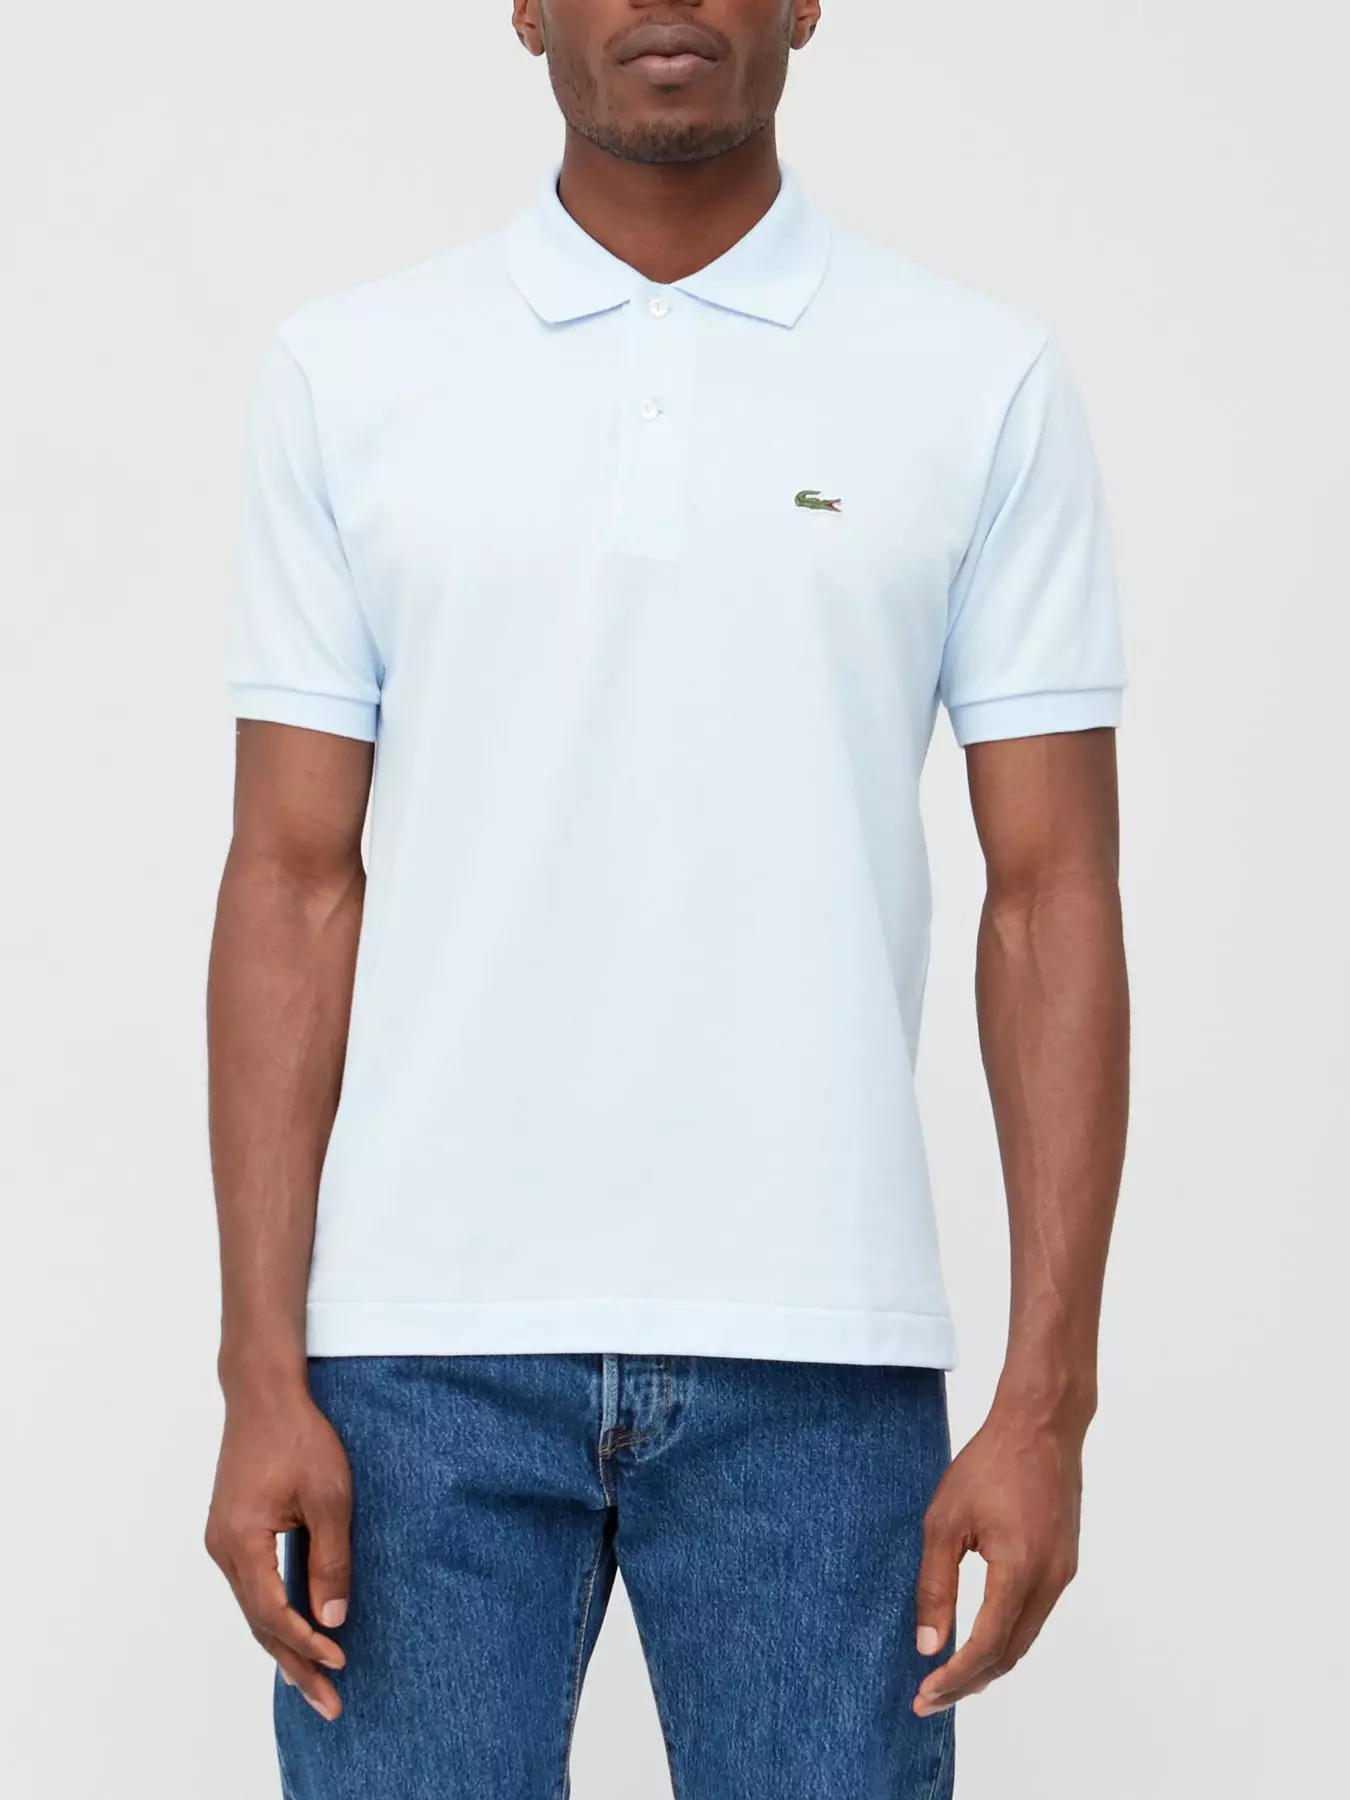 Lacoste T-Shirts | Lacoste Polo Shirts Very.co.uk